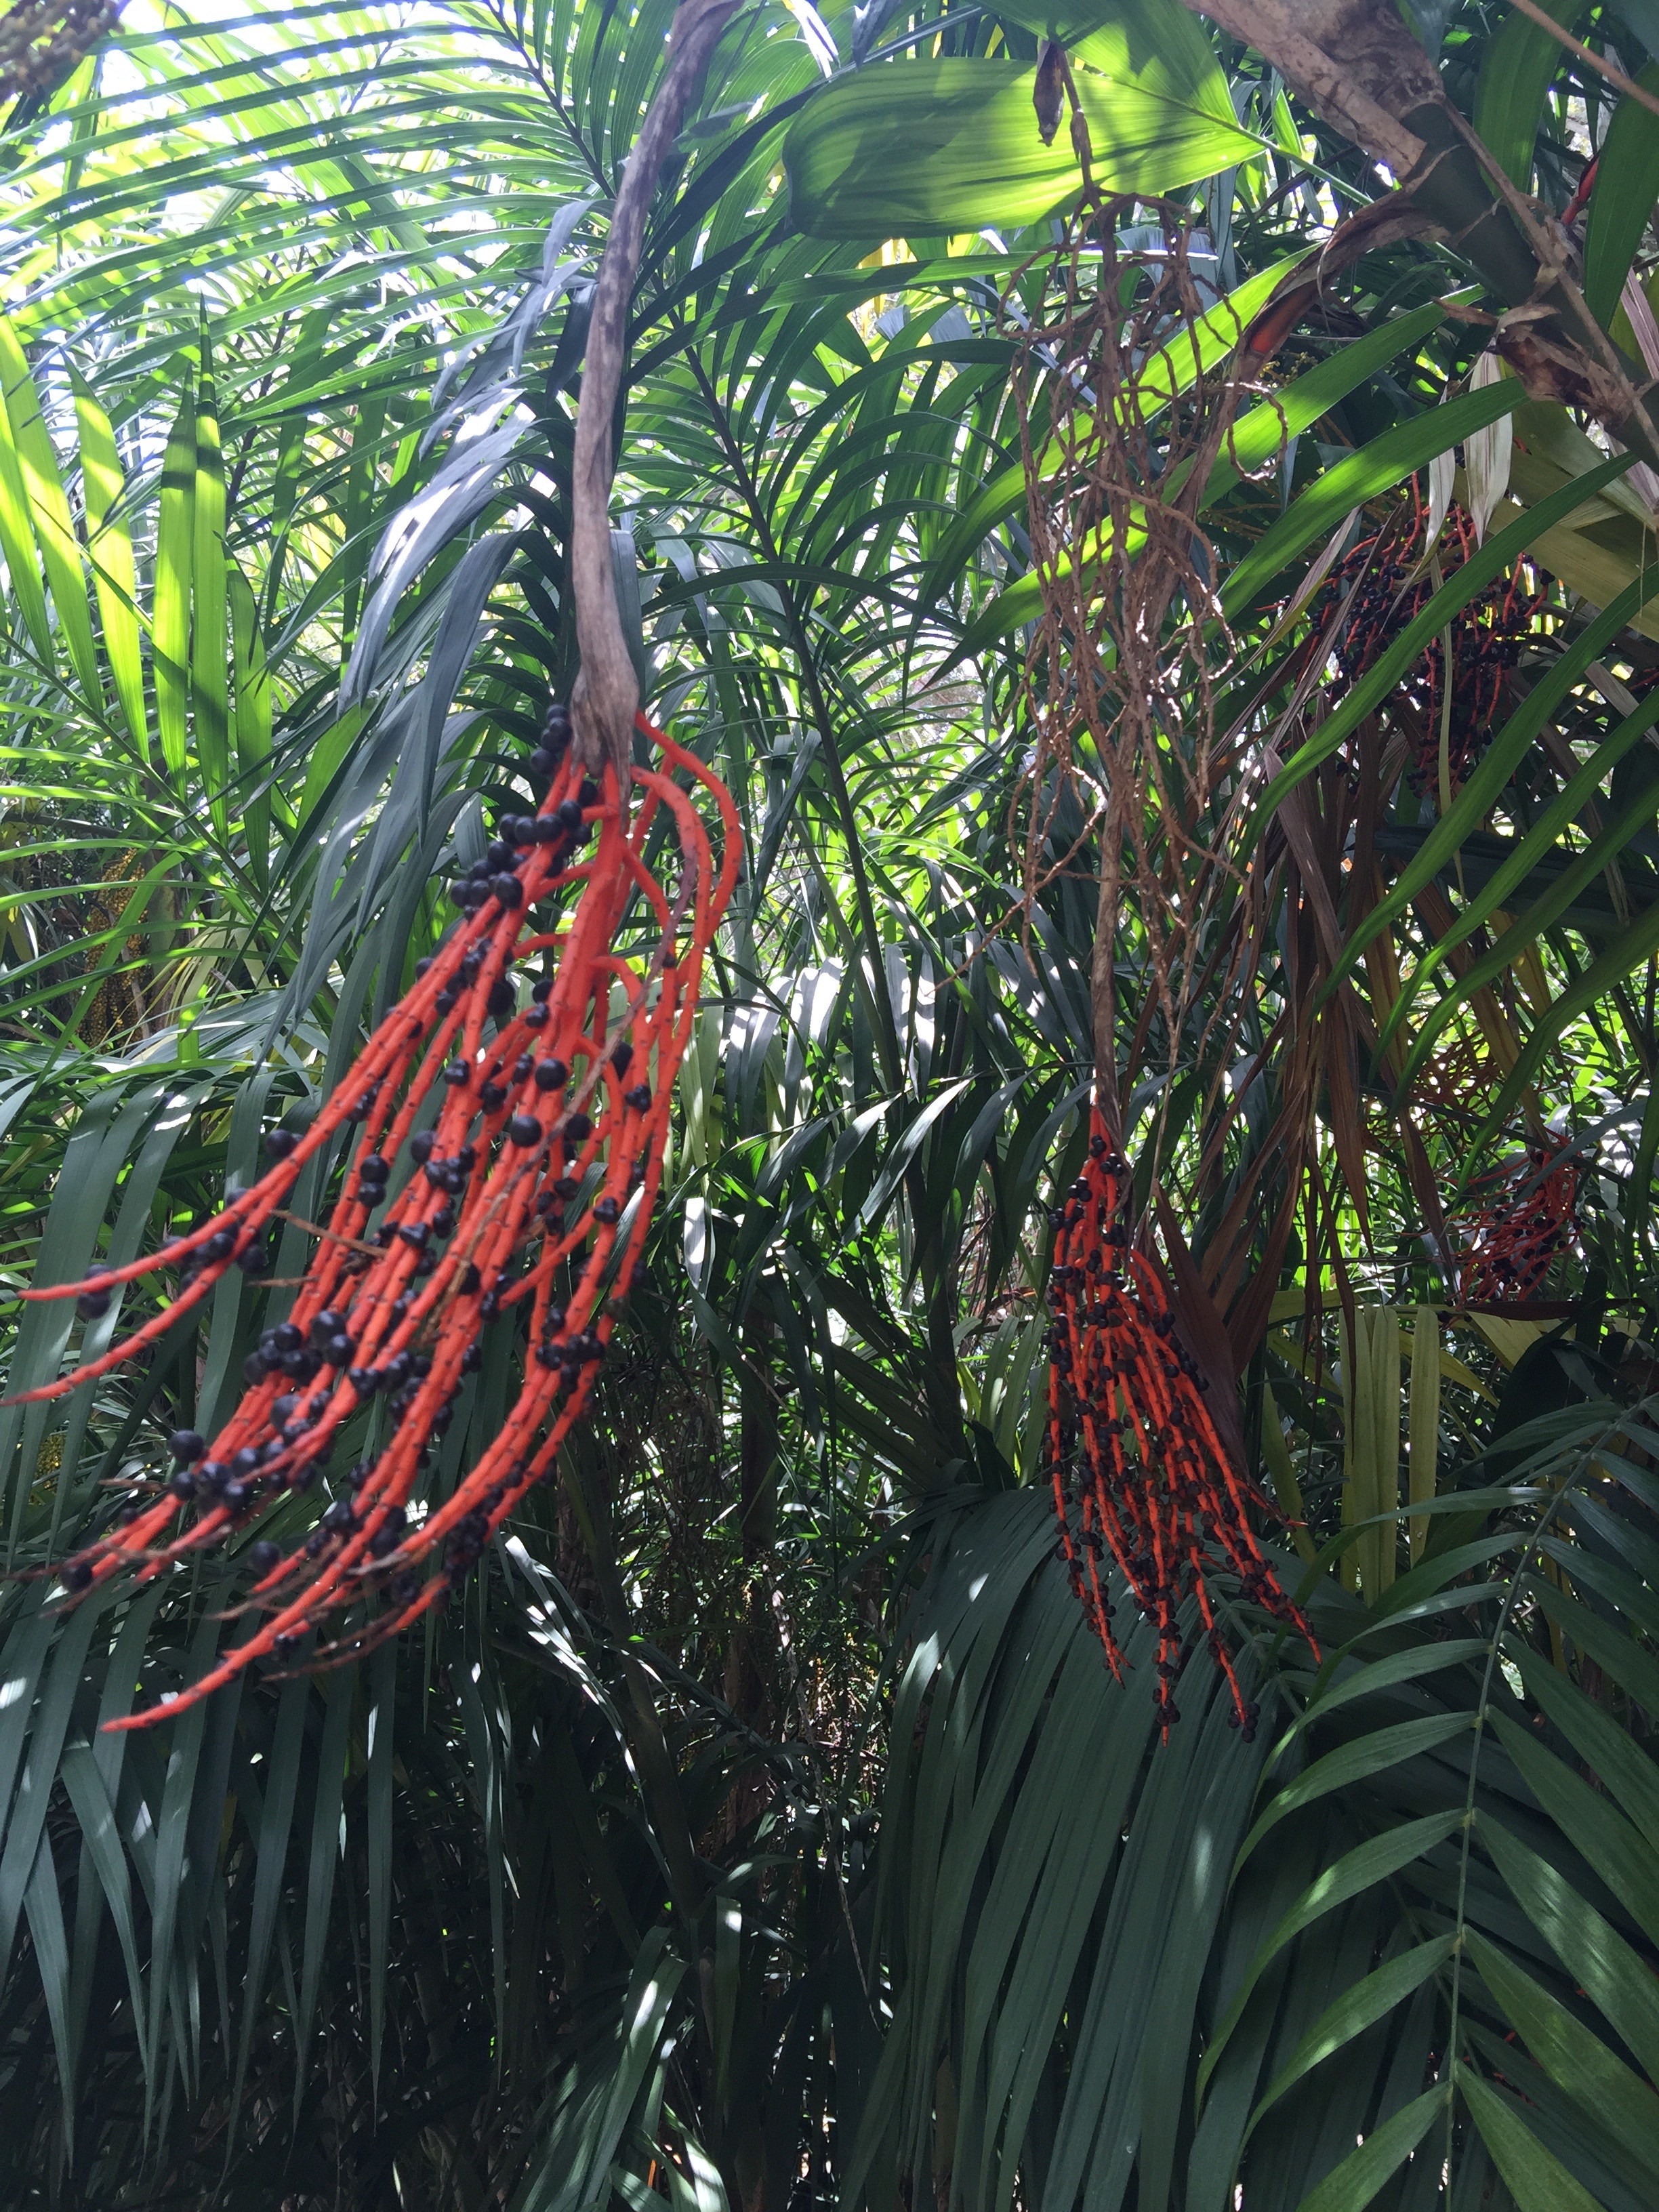 One of the to-be bronzed plants from The Lotusland Garden